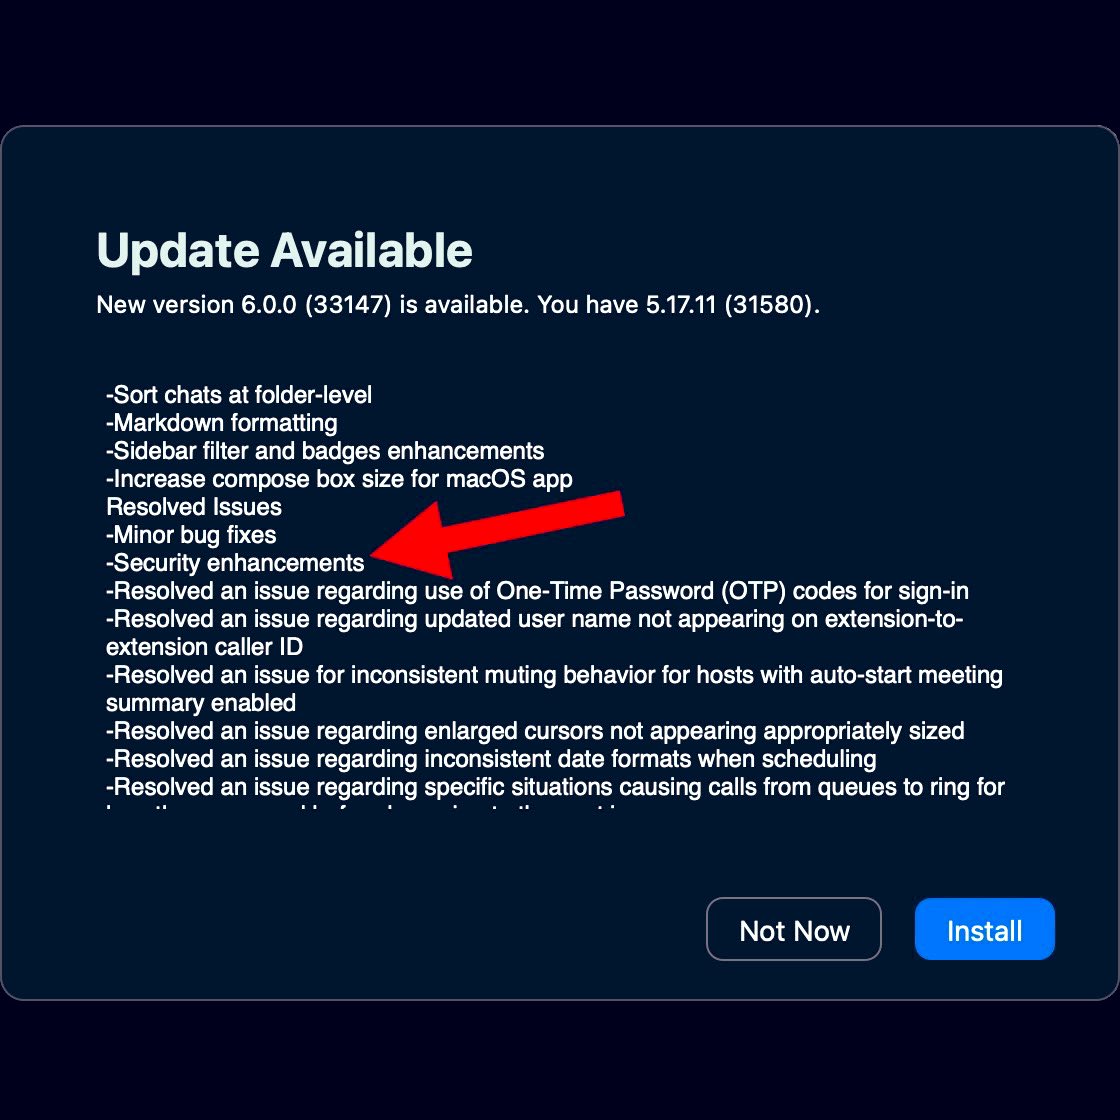 Zoom Desktop Client (now rebranded as “Zoom Workplace”) is now at version 6.0.0 for macOS, Windows, and Linux. It includes “security enhancements.” (Zoom hasn’t released security bulletins or CVE details yet.) Also watch for iOS and Android updates, which should be coming soon.